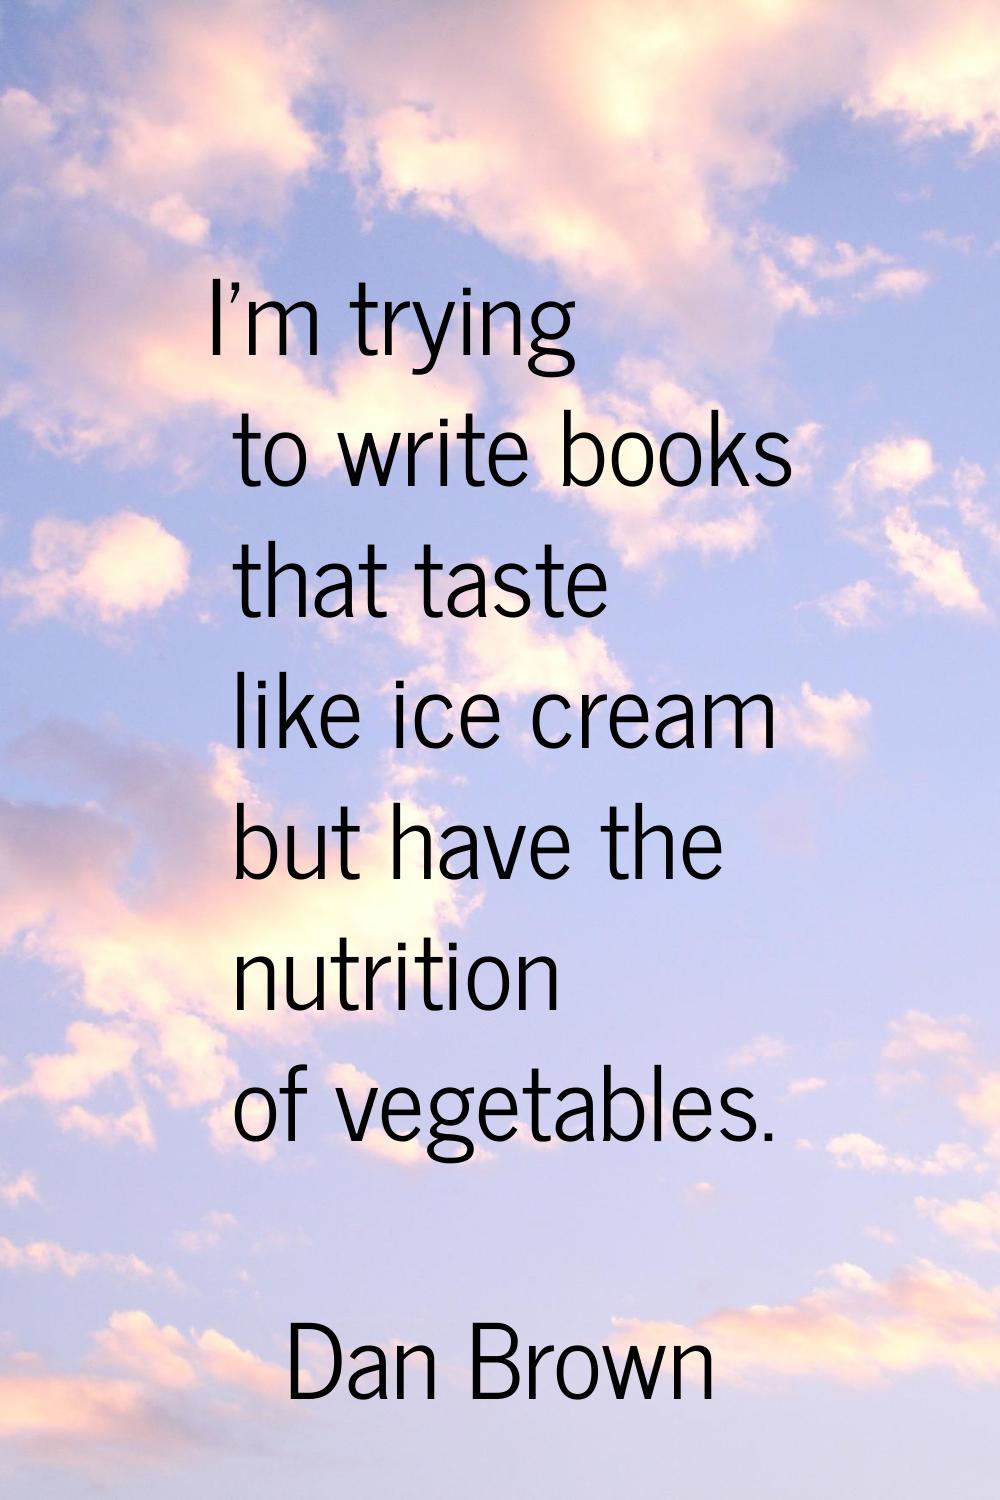 I'm trying to write books that taste like ice cream but have the nutrition of vegetables.